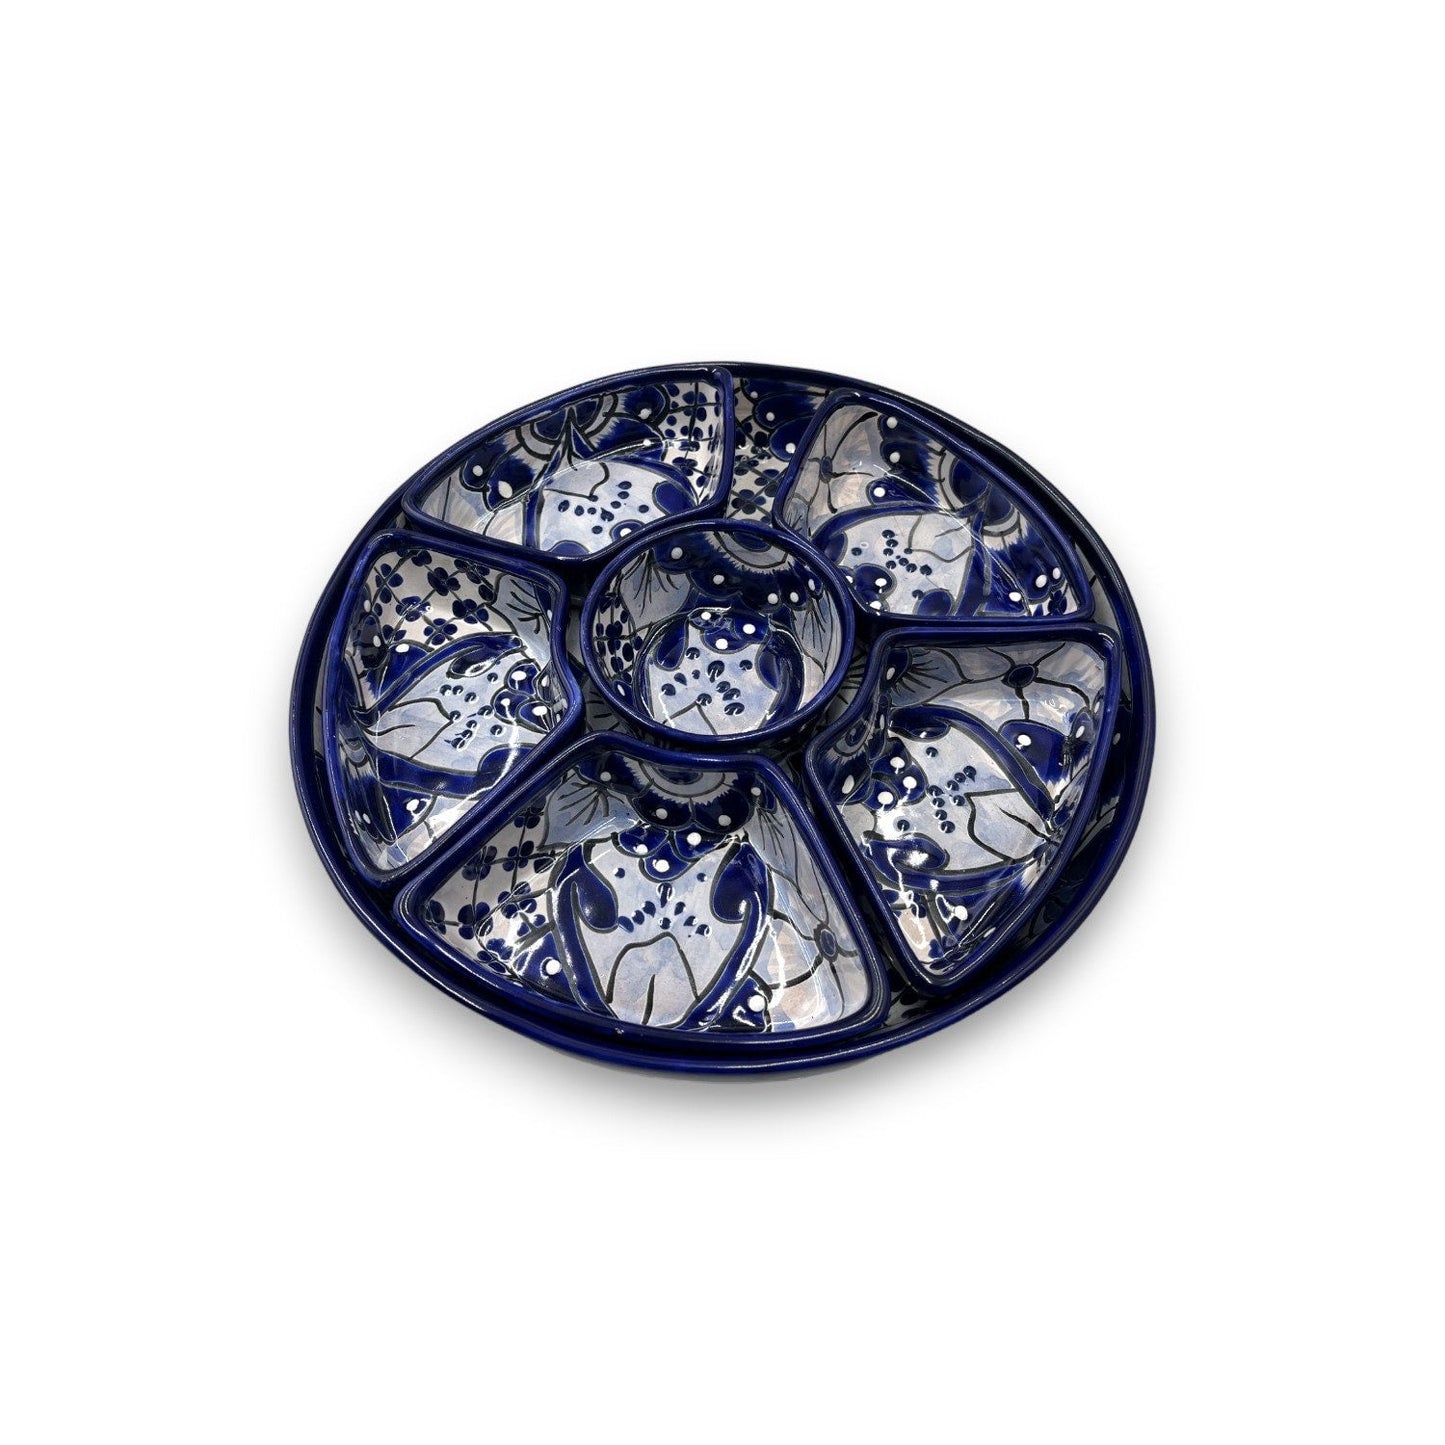 Mexican Handmade Talavera Sectional Appetizer Tray | Hand Painted Pottery